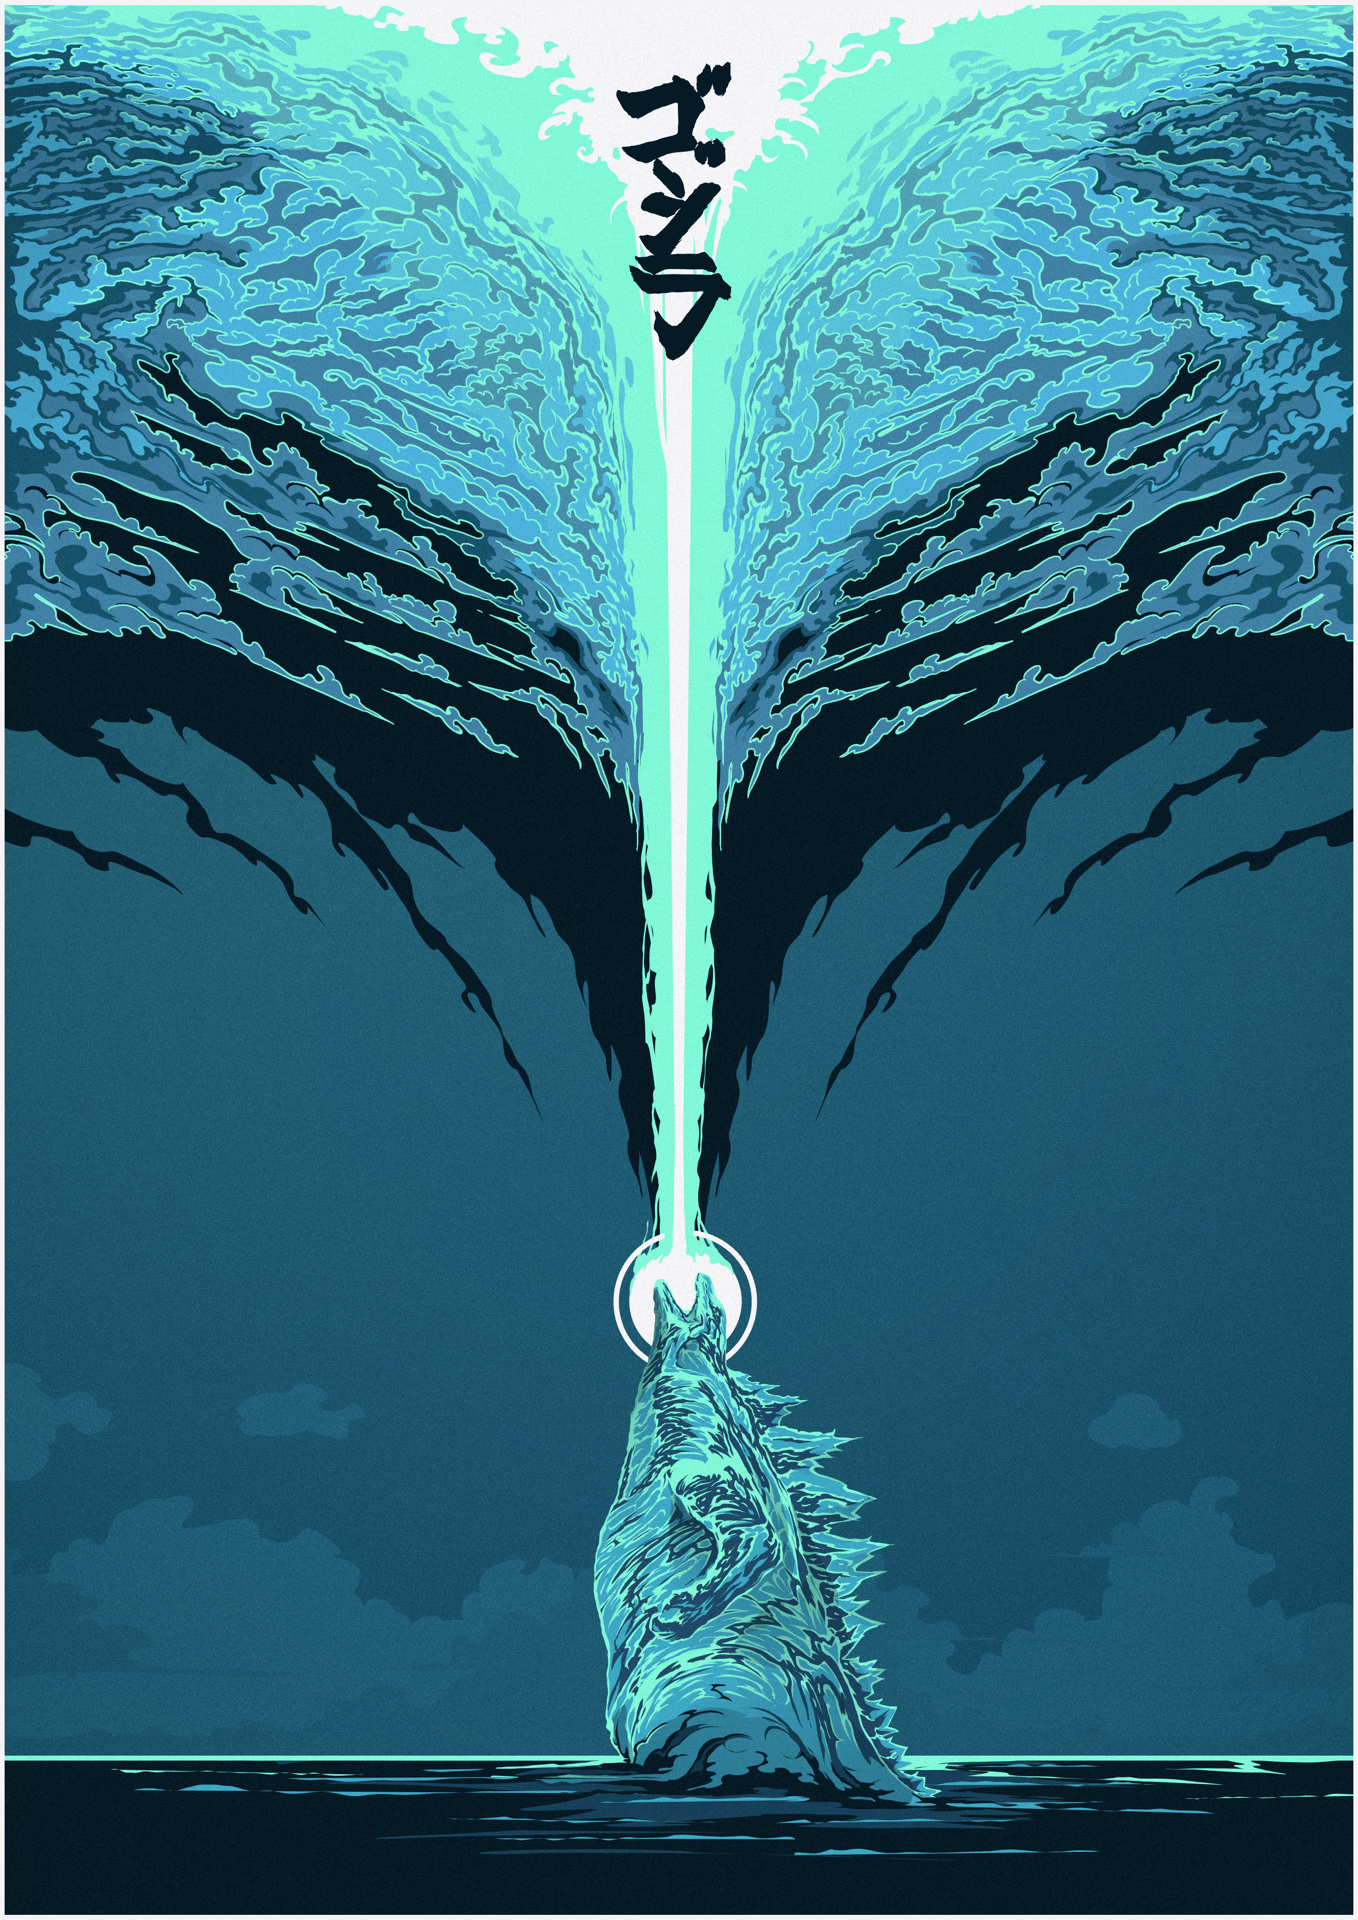 Godzilla: King of the Monsters (2019) 1358 x 1920